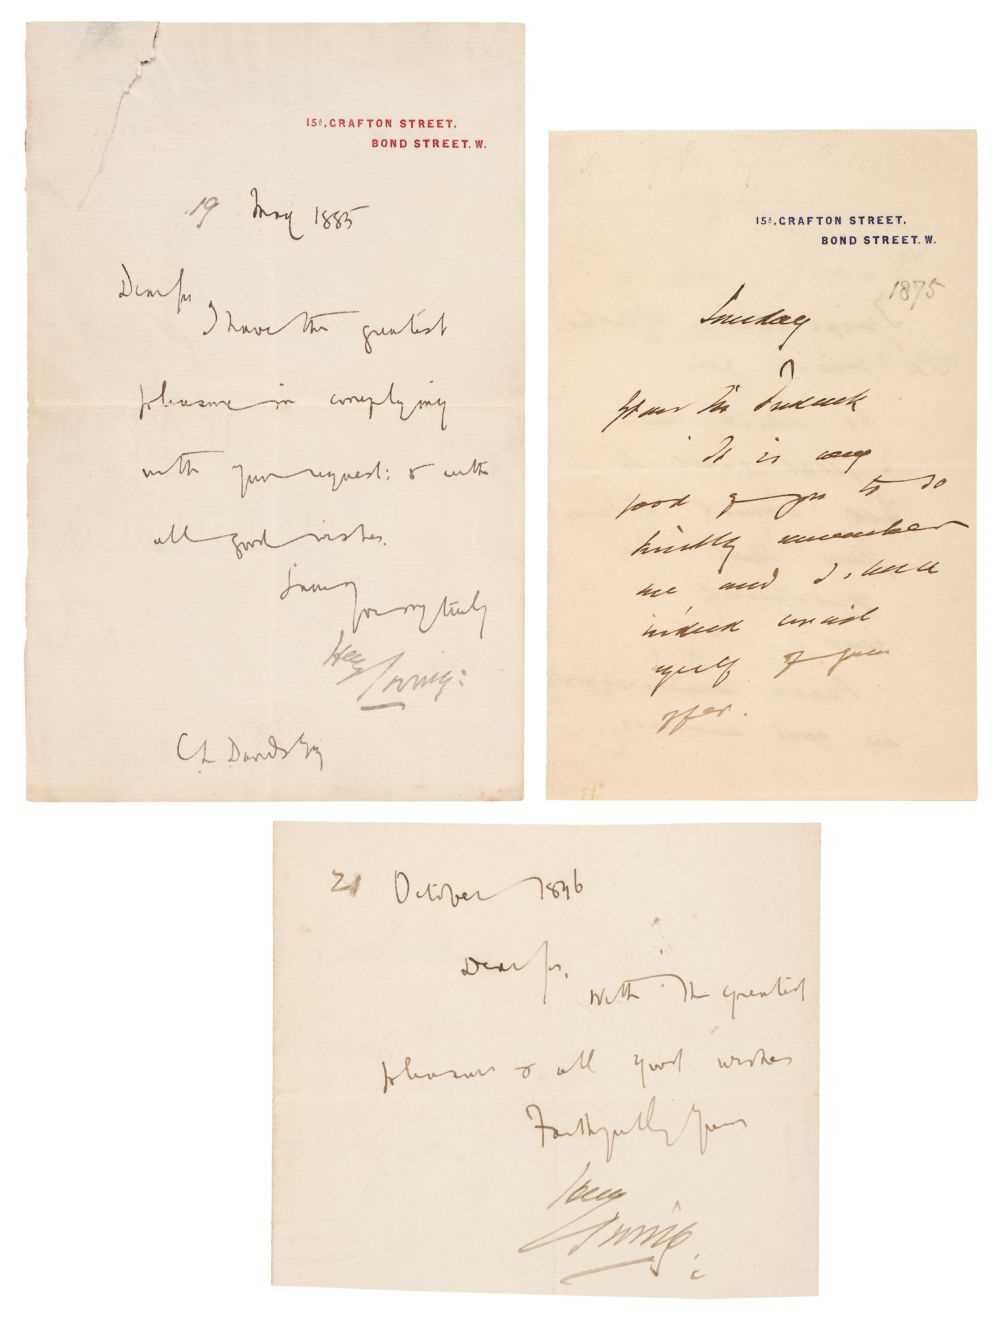 Lot 208 - Irving (Henry, 1838-1905). Letter Signed, 'Henry Irving', 15a Grafton Street, 19 May 1885